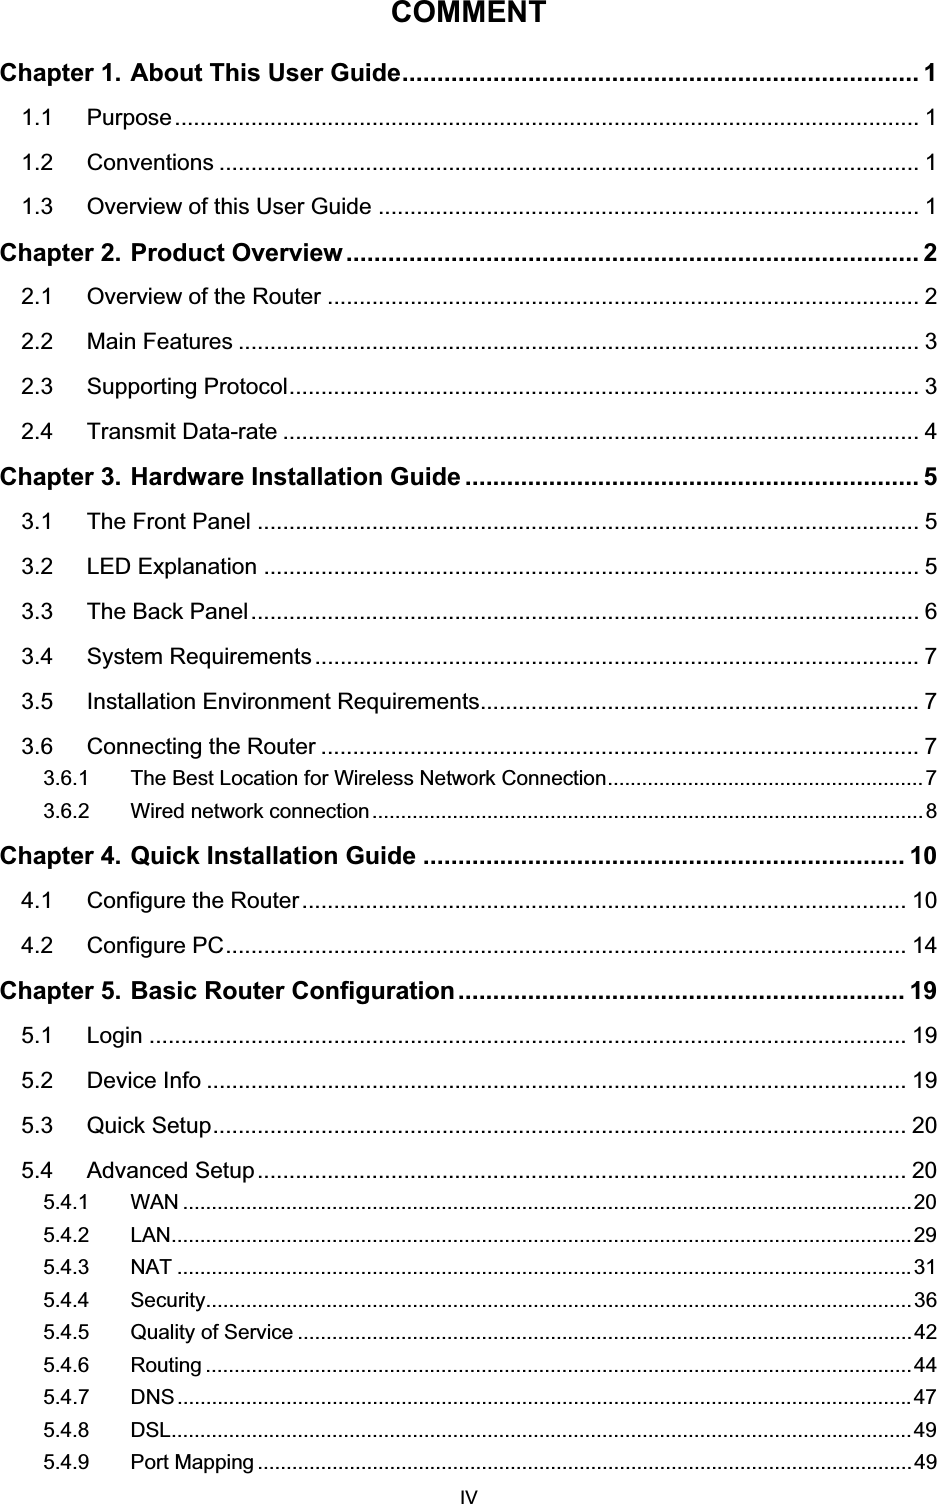 COMMENTChapter 1. About This User Guide.......................................................................... 11.1 Purpose..................................................................................................................... 11.2 Conventions .............................................................................................................. 11.3 Overview of this User Guide ..................................................................................... 1Chapter 2. Product Overview .................................................................................. 22.1 Overview of the Router ............................................................................................. 22.2 Main Features ........................................................................................................... 32.3 Supporting Protocol................................................................................................... 32.4 Transmit Data-rate .................................................................................................... 4Chapter 3. Hardware Installation Guide ................................................................. 53.1 The Front Panel ........................................................................................................ 53.2 LED Explanation ....................................................................................................... 53.3 The Back Panel......................................................................................................... 63.4 System Requirements............................................................................................... 73.5 Installation Environment Requirements..................................................................... 73.6 Connecting the Router .............................................................................................. 73.6.1 The Best Location for Wireless Network Connection....................................................... 73.6.2 Wired network connection................................................................................................8Chapter 4. Quick Installation Guide ..................................................................... 104.1 Configure the Router............................................................................................... 104.2 Configure PC........................................................................................................... 14Chapter 5. Basic Router Configuration................................................................ 195.1 Login ....................................................................................................................... 195.2 Device Info .............................................................................................................. 195.3 Quick Setup............................................................................................................. 205.4 Advanced Setup...................................................................................................... 205.4.1 WAN ...............................................................................................................................205.4.2 LAN.................................................................................................................................295.4.3 NAT ................................................................................................................................315.4.4 Security...........................................................................................................................365.4.5 Quality of Service ...........................................................................................................425.4.6 Routing ...........................................................................................................................445.4.7 DNS................................................................................................................................475.4.8 DSL.................................................................................................................................495.4.9 Port Mapping ..................................................................................................................49 IV